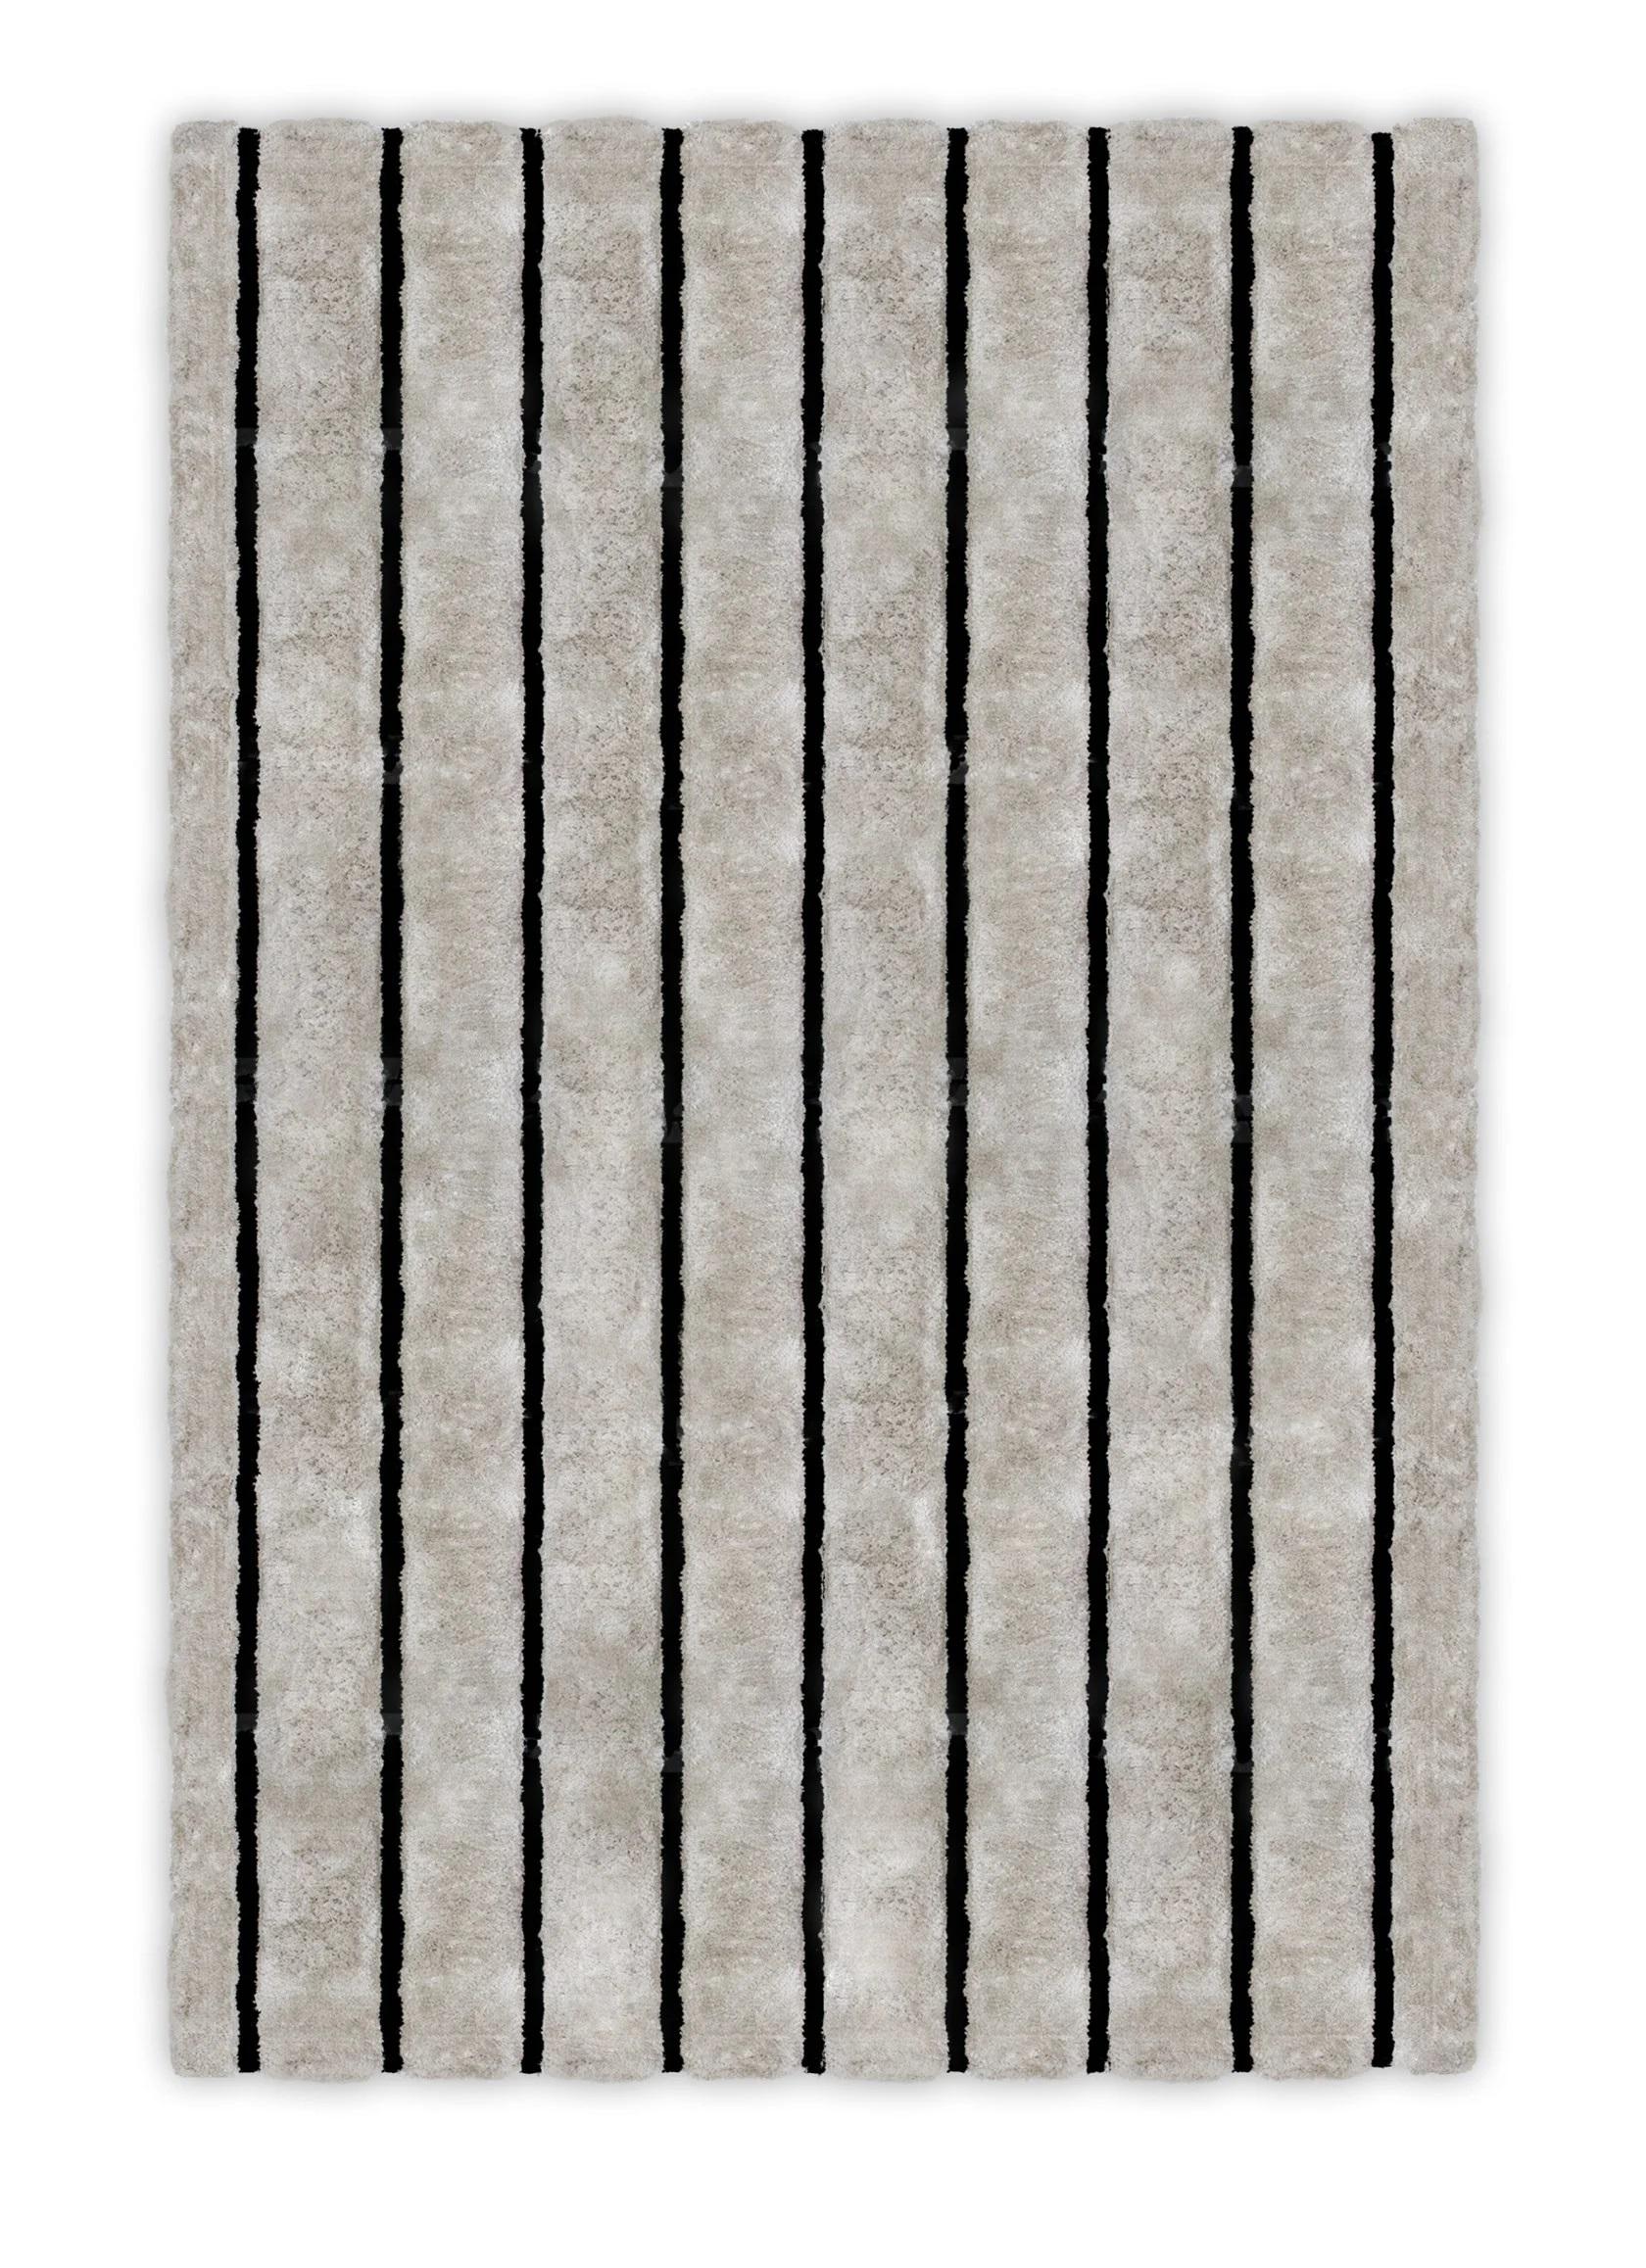 Cream Ever rug by Paolo Stella
Dimensions: D 200 x W 300cm (Pile heigh: 1.2 - 3 cm)
Materials: viscose, linen
Available in other color.

“My first memory of a rug is Aladdin’s flying carpet magically helping you to fulfill you dreams.
The day